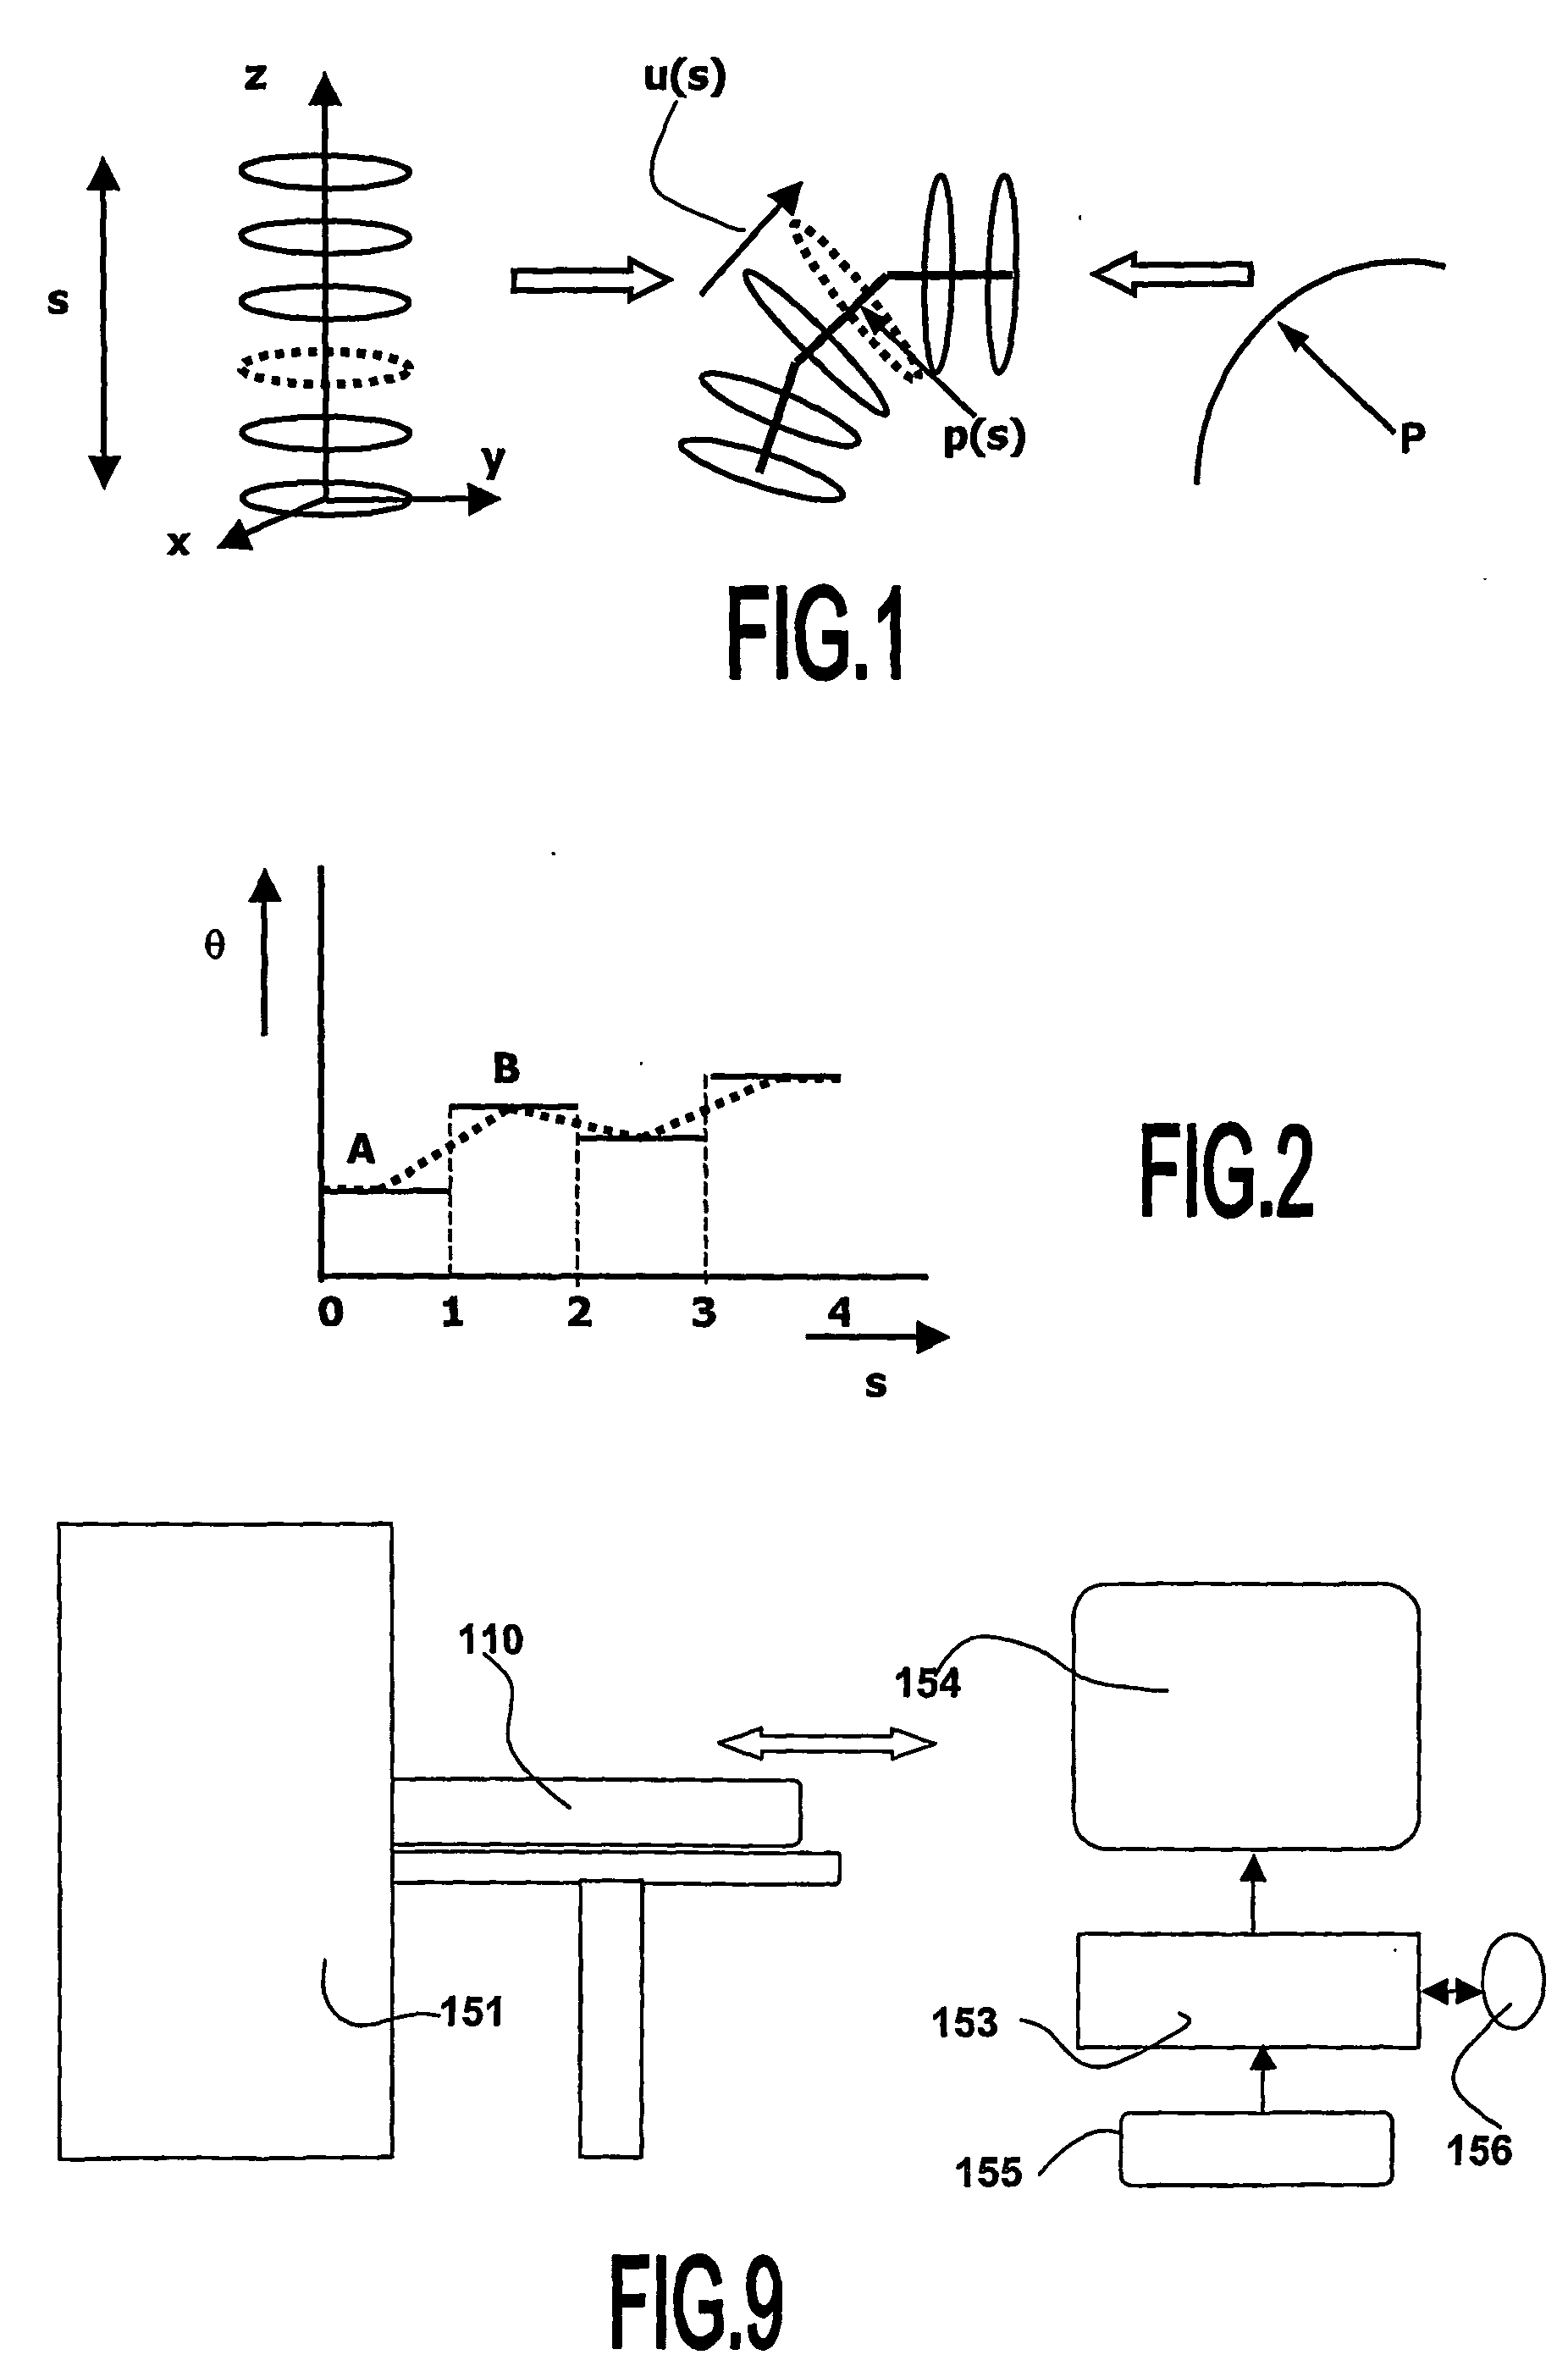 Image processing method for automatic adaptation of 3-d deformable model onto a substantially tubular surface of a 3-d object